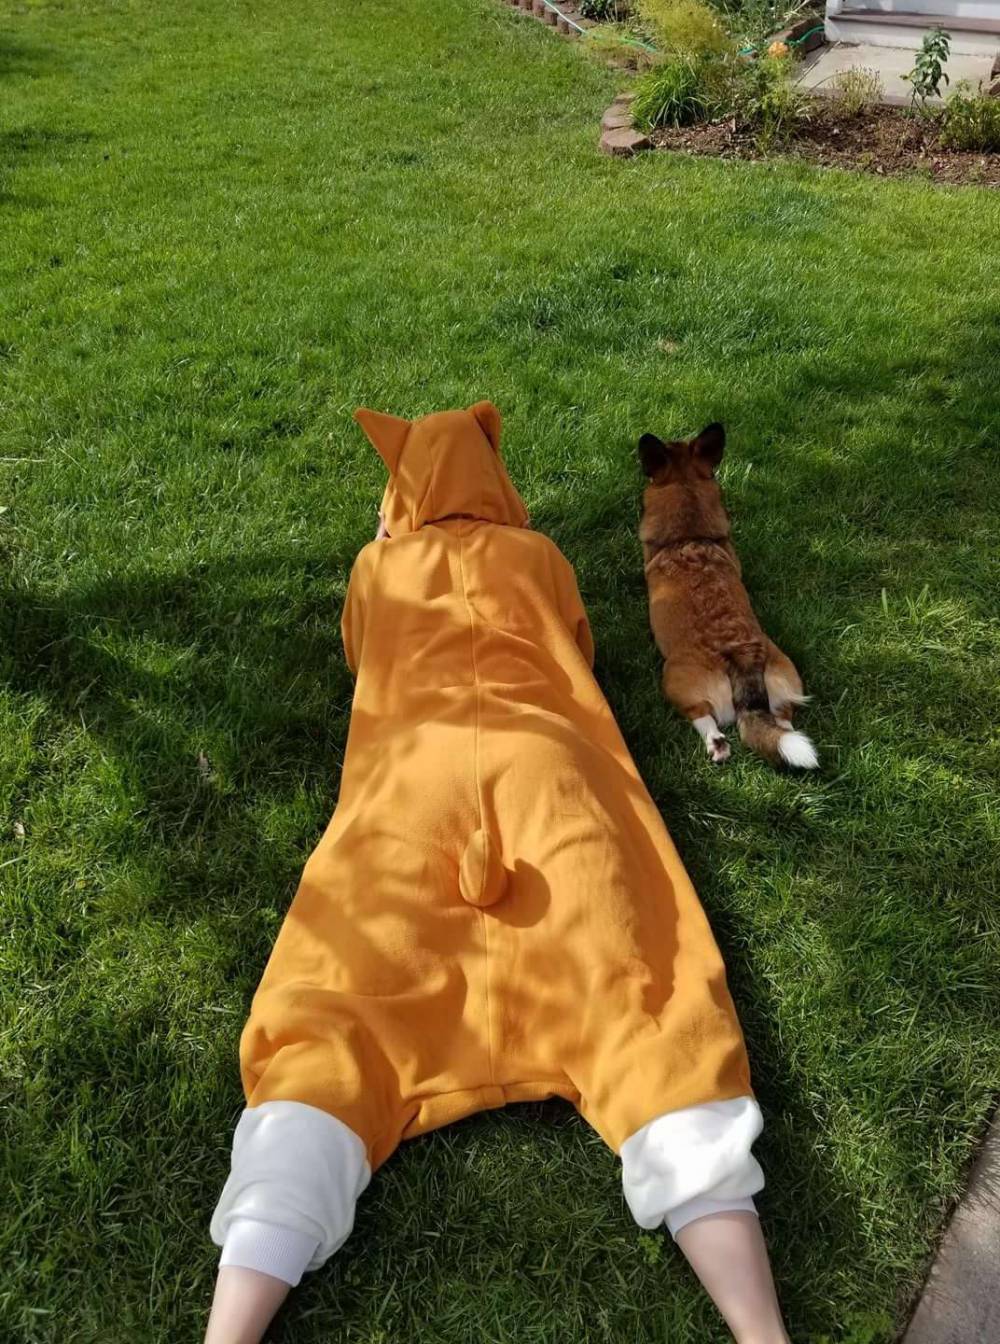 dog lying in grass next to human wearing dog costume